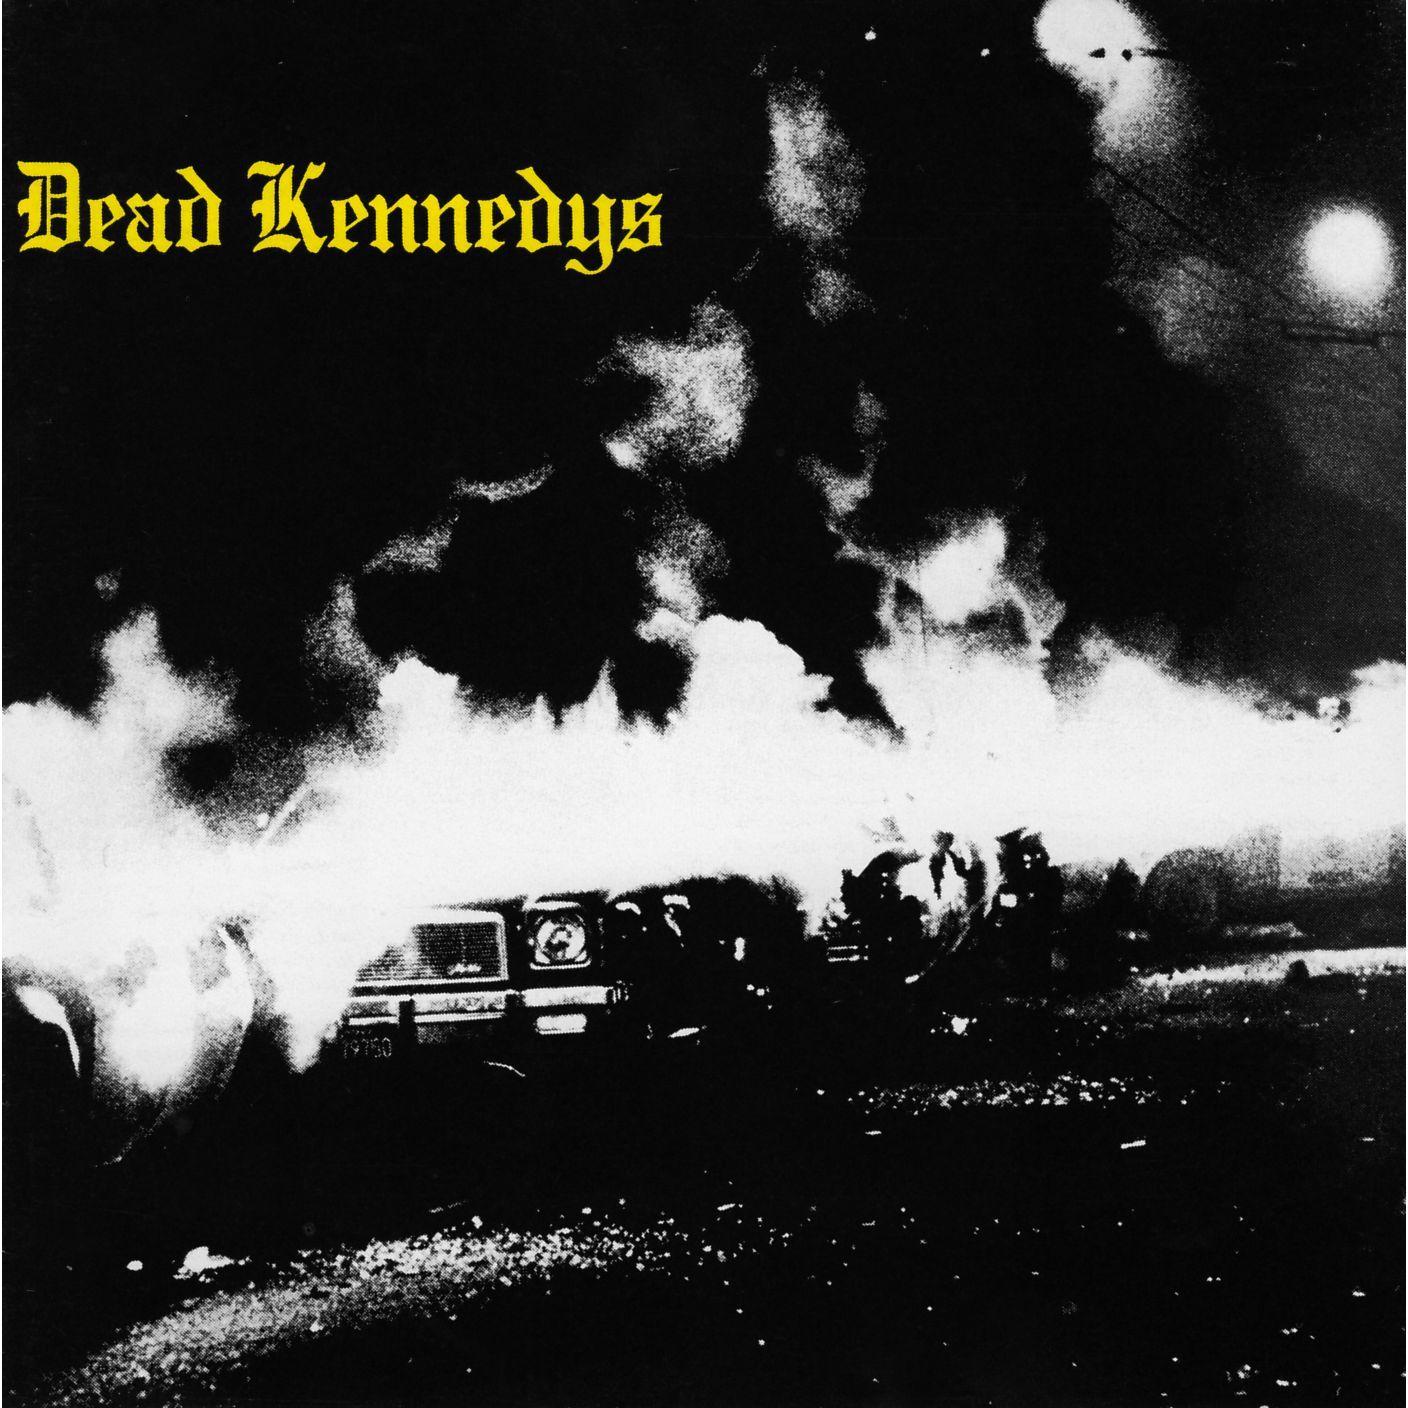 The Dead Kennedys